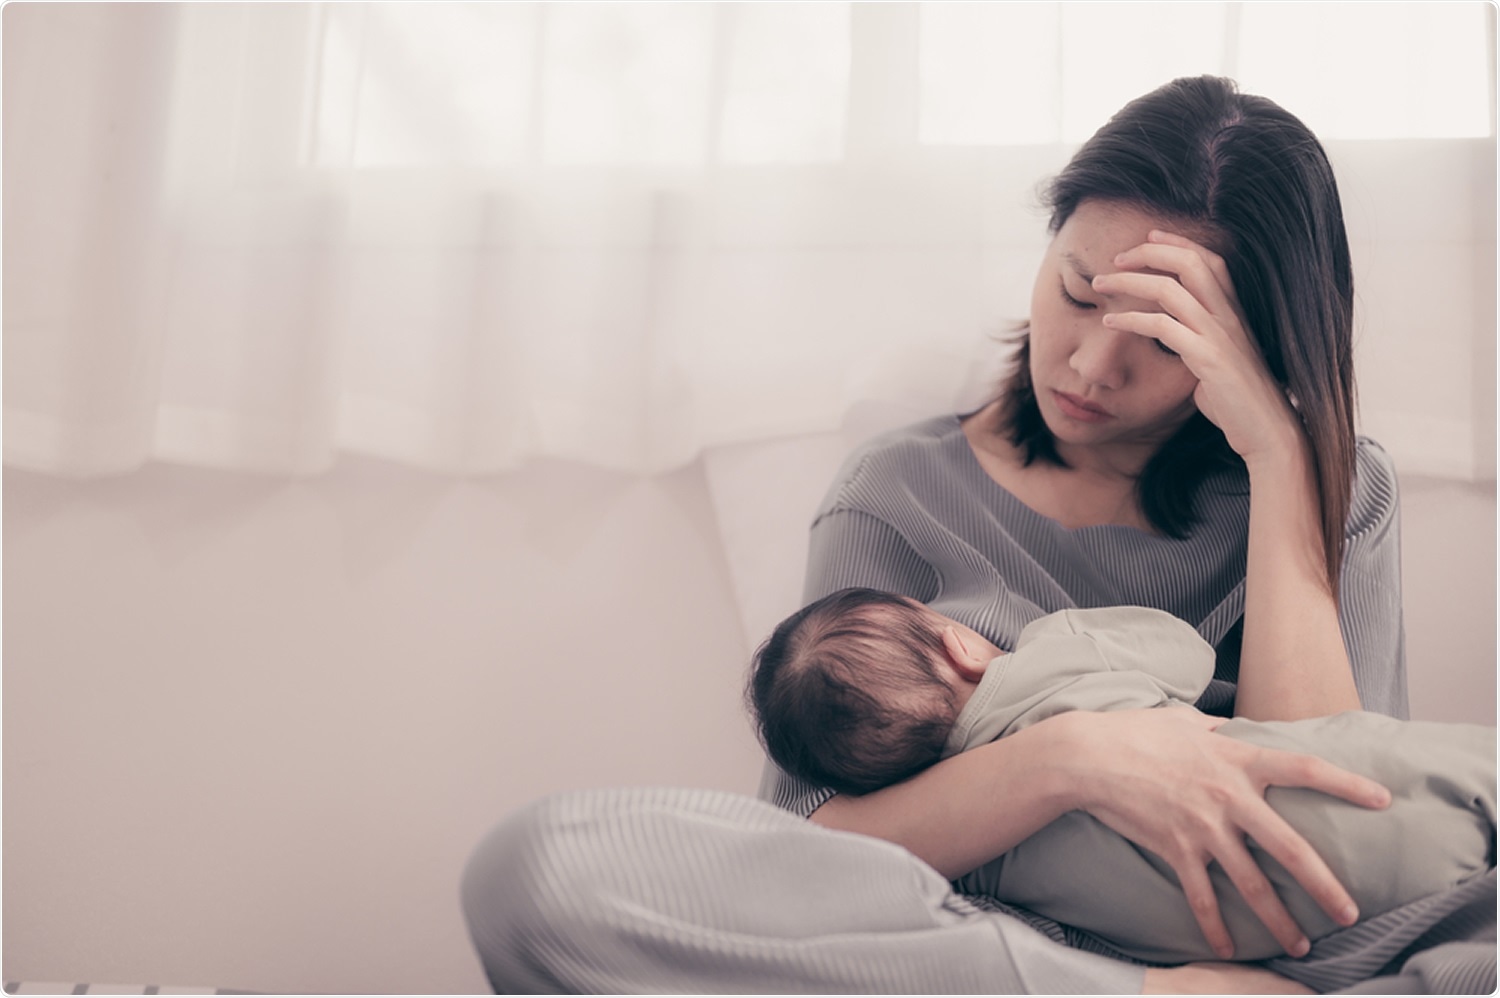 Study: The effect of social restrictions, loss of social support, and loss of maternal autonomy on postpartum depression in 1 to 12-months postpartum women during the COVID-19 pandemic. Image Credit: GrooveZ / Shutterstock